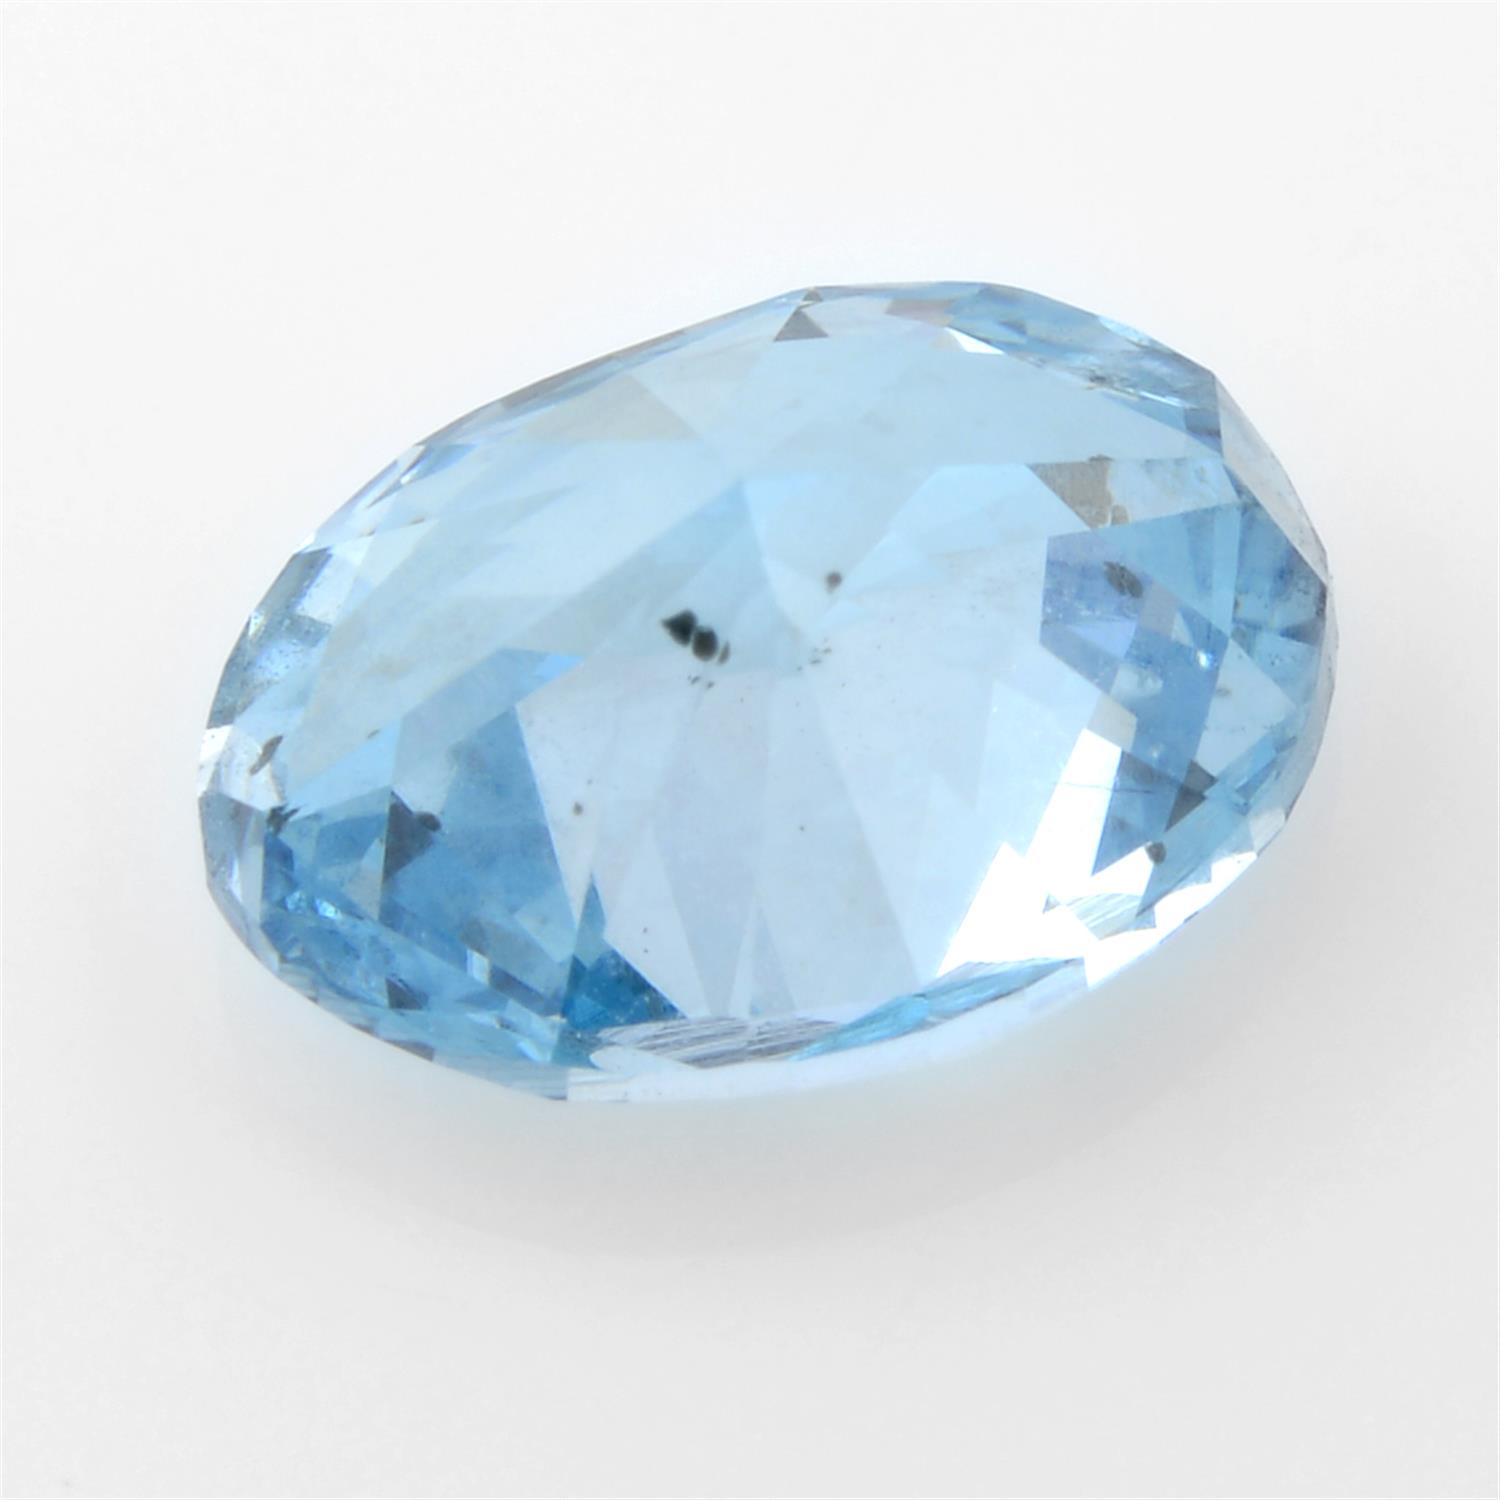 An oval shape HPHT treated 'blue' diamond, weighing 1ct - Image 2 of 2